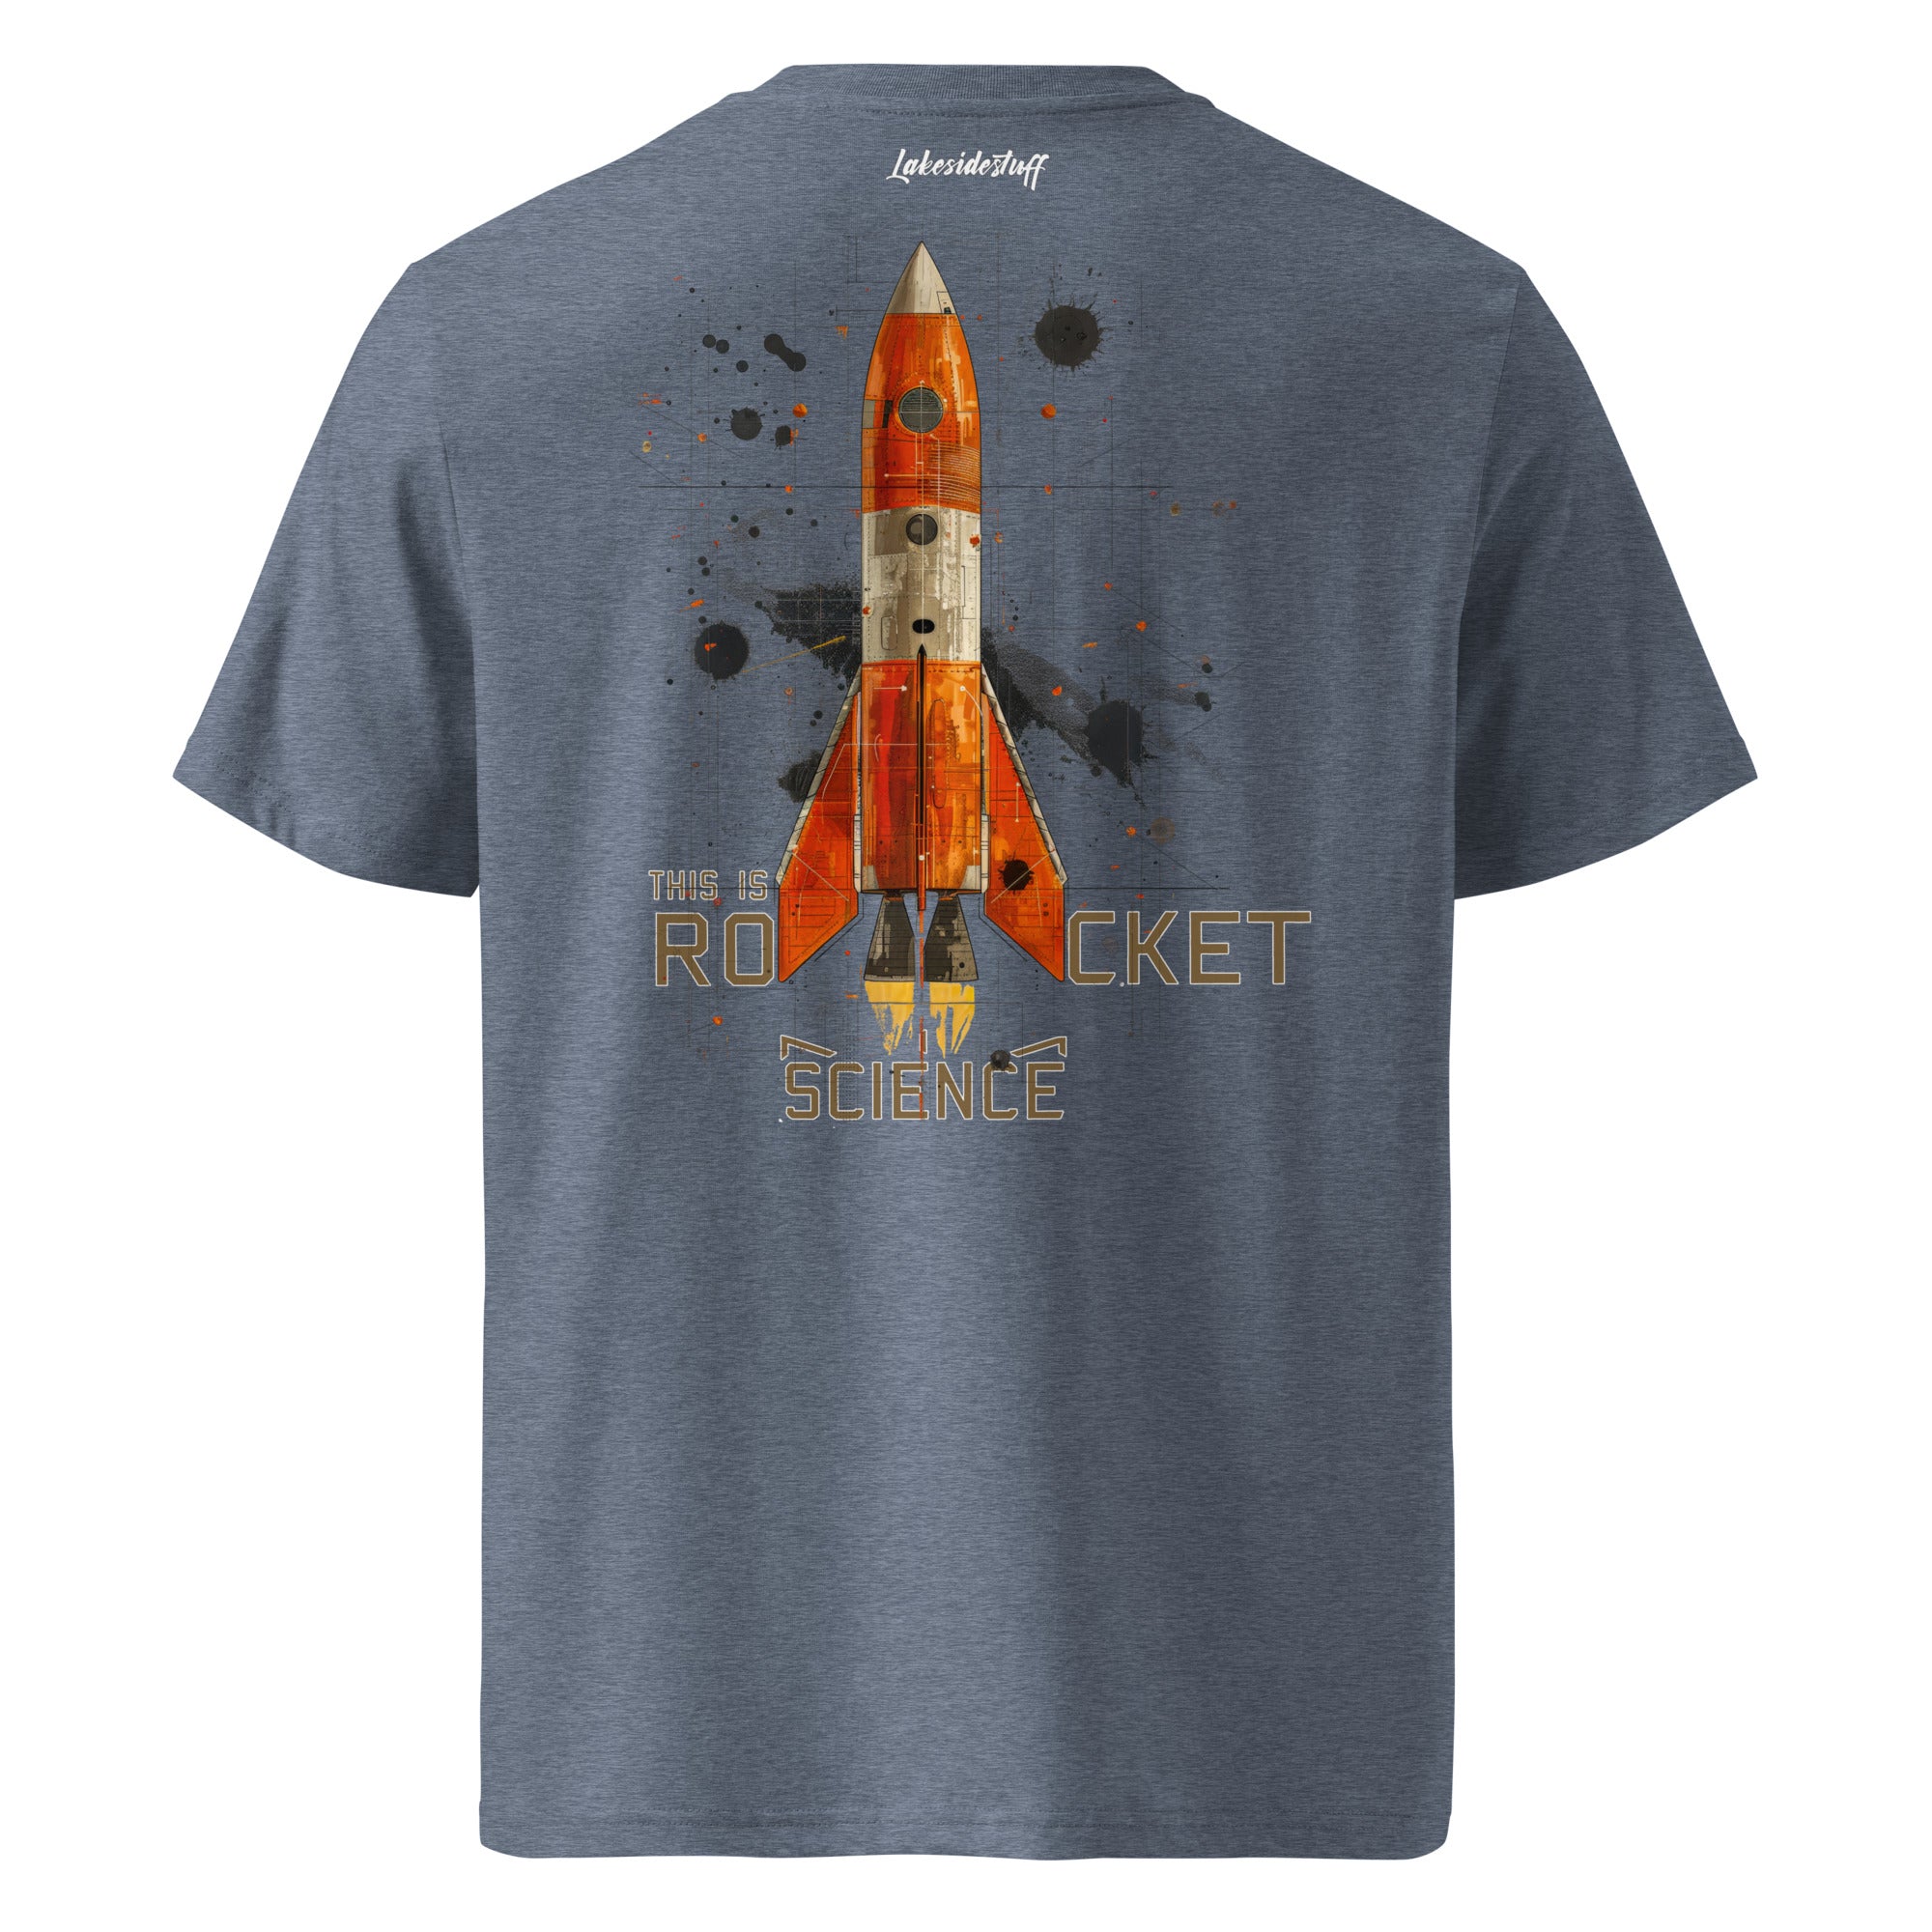 T-Shirt - Backprint - This is rocket science